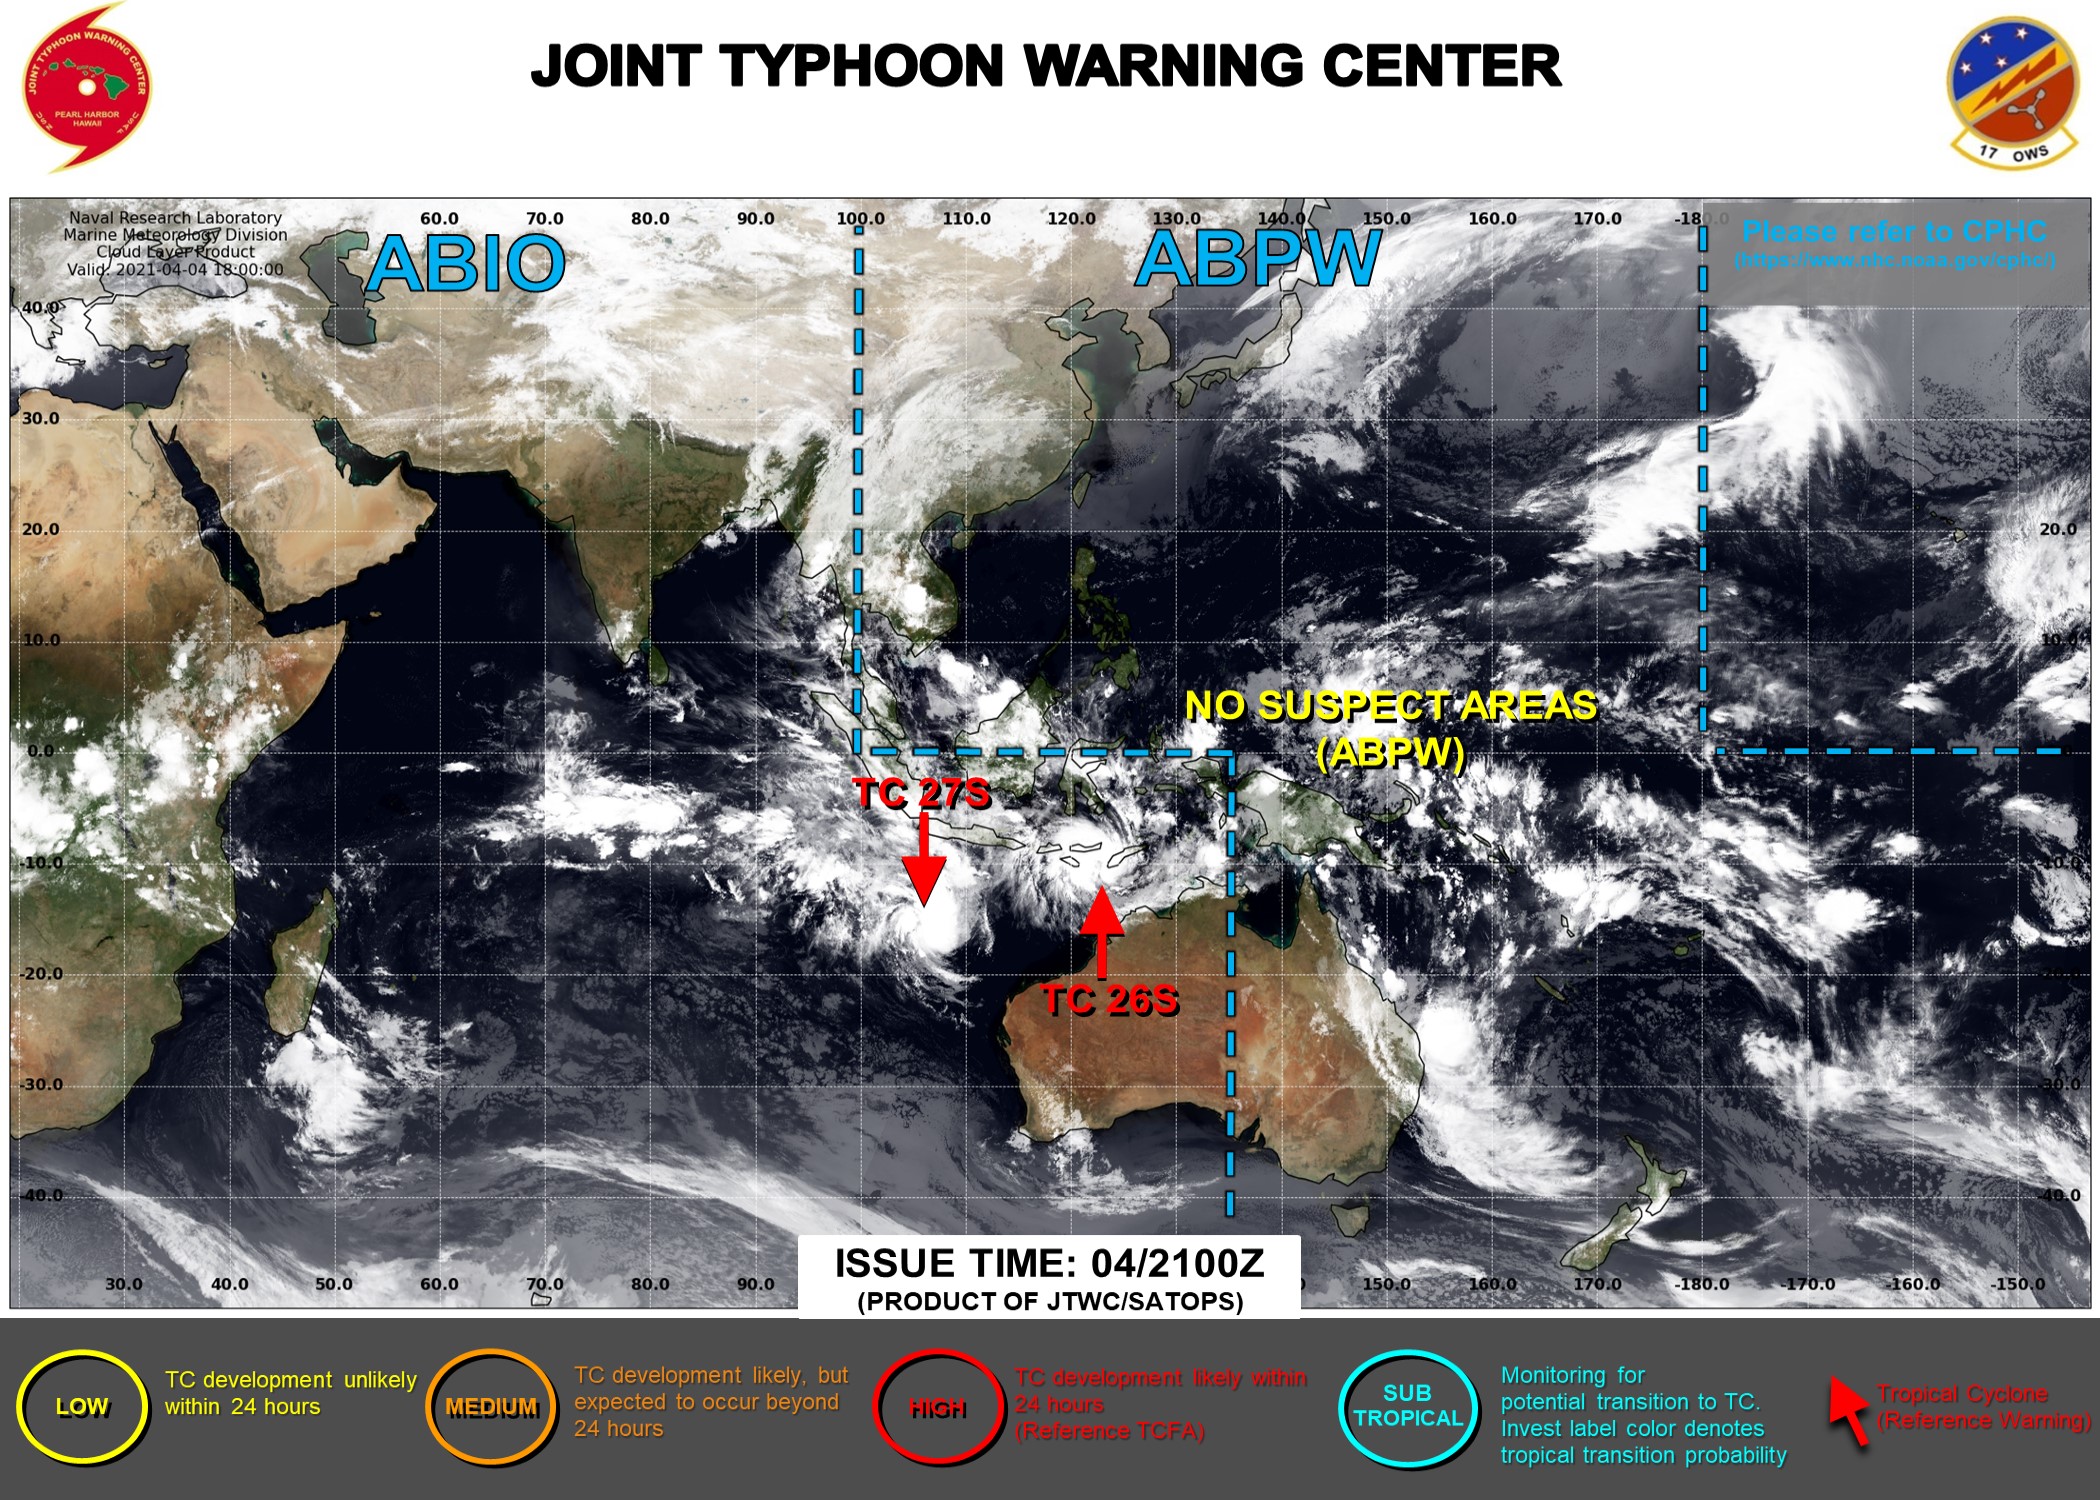 05/03UTC. JTWC IS ISSUING 6HOURLY WARNINGS ON TC 27S(SEROJA) AND 12HOURLY WARNINGS ON TC 27S. 3HOURLY SATELLITE BULLETINS ARE ISSUED FOR BOTH SYSTEMS.